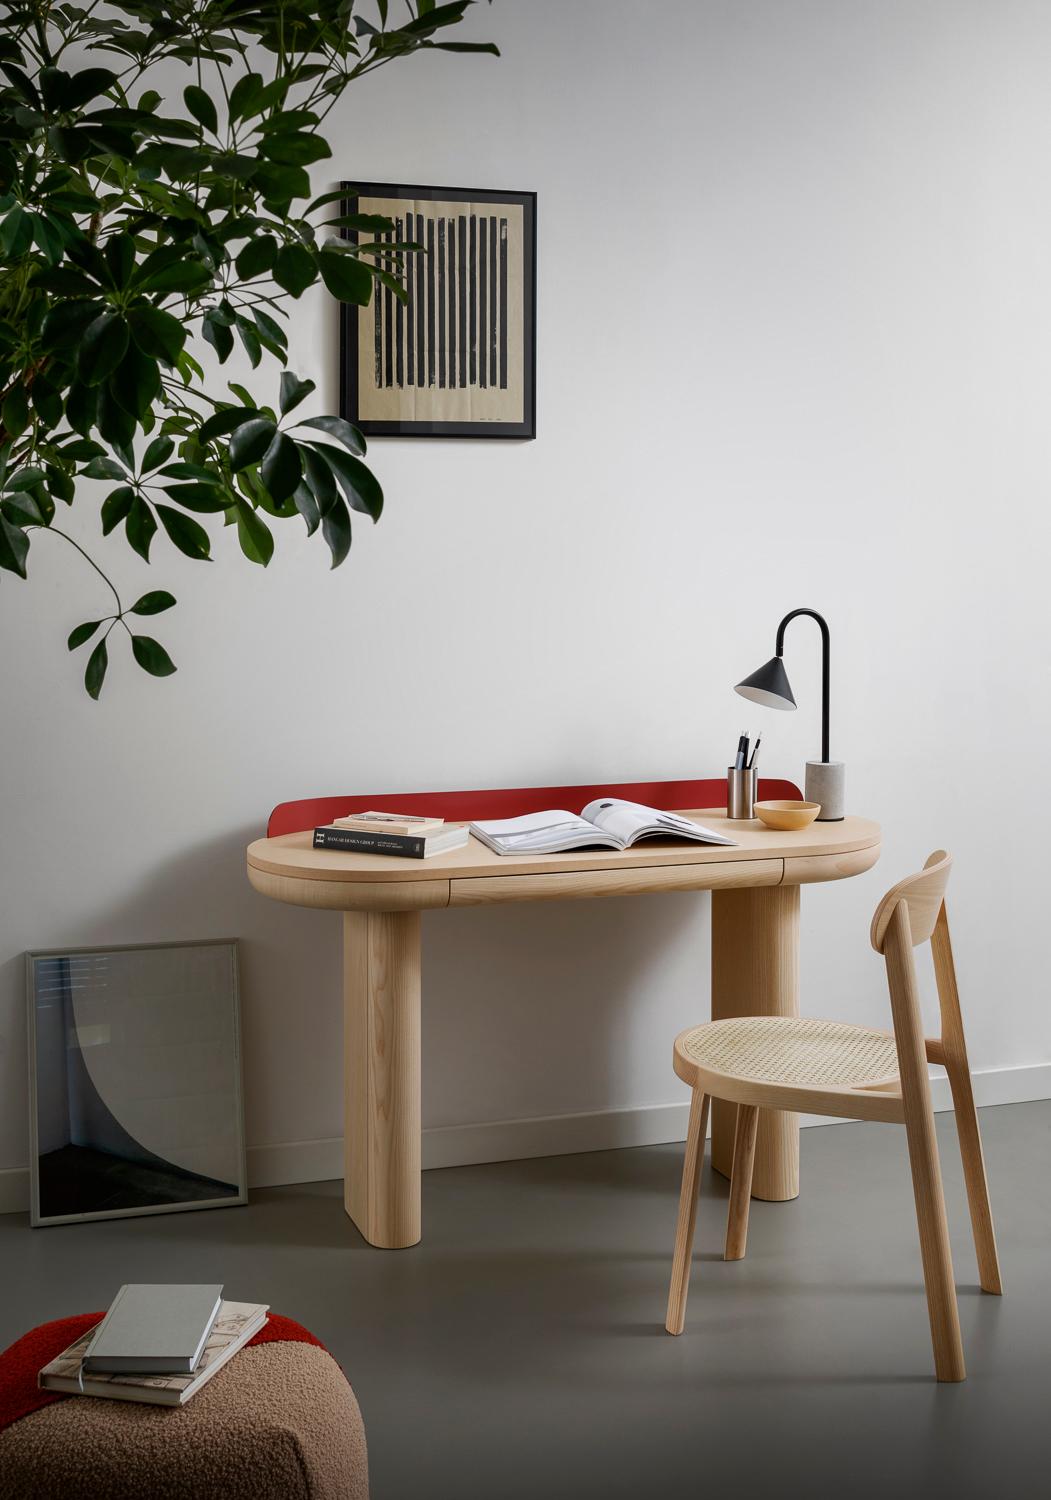 Inspired by 20th-century Austrian chairs, Brulla is a stackable wooden seat. Its defining aesthetic is given by the juxtaposition of curves and straight lines, creating a strong sense of identity and minimalist spirit: the dynamic momentum of the